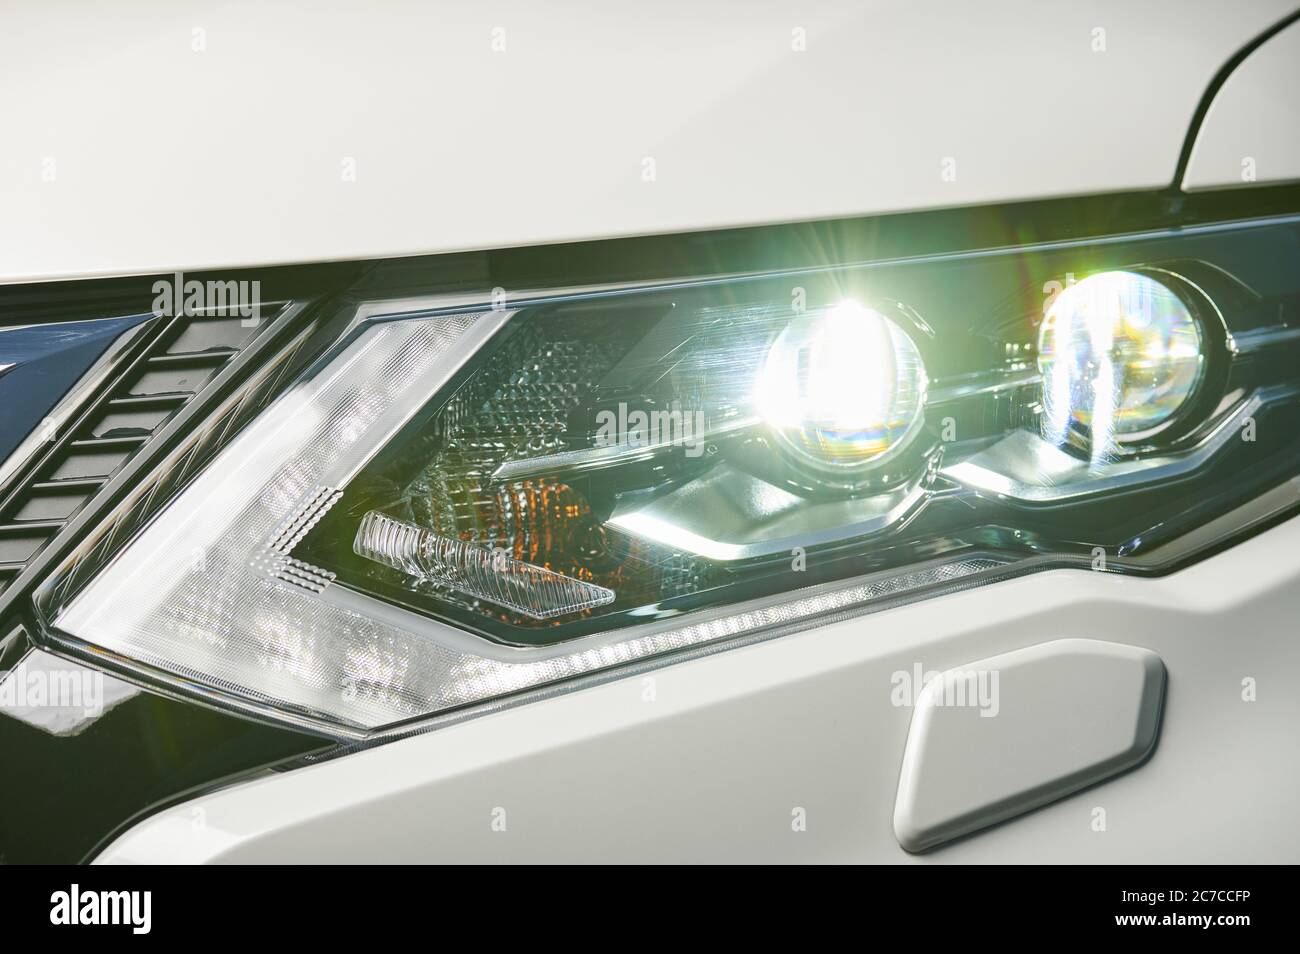 Front car headlight with lamp on close up view Stock Photo